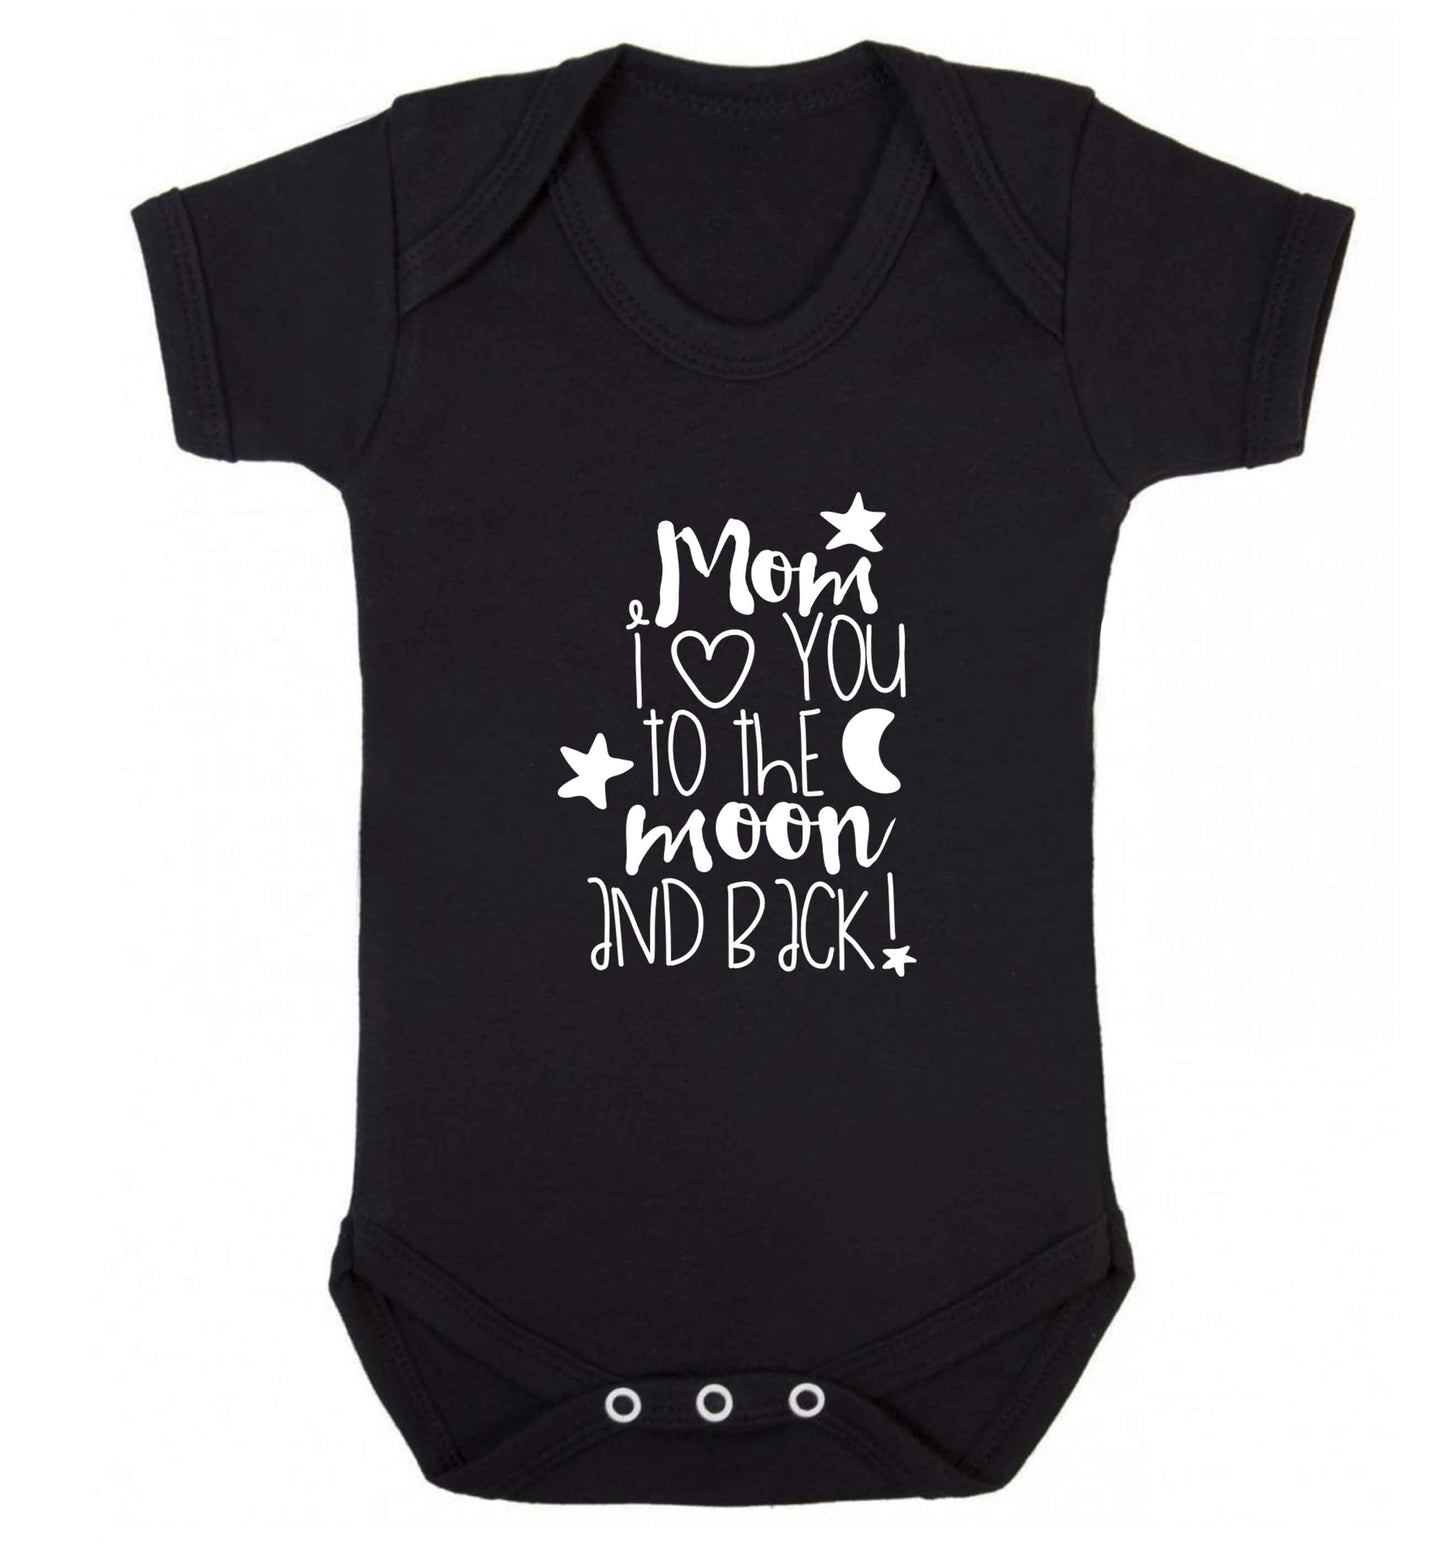 Mom I love you to the moon and back baby vest black 18-24 months